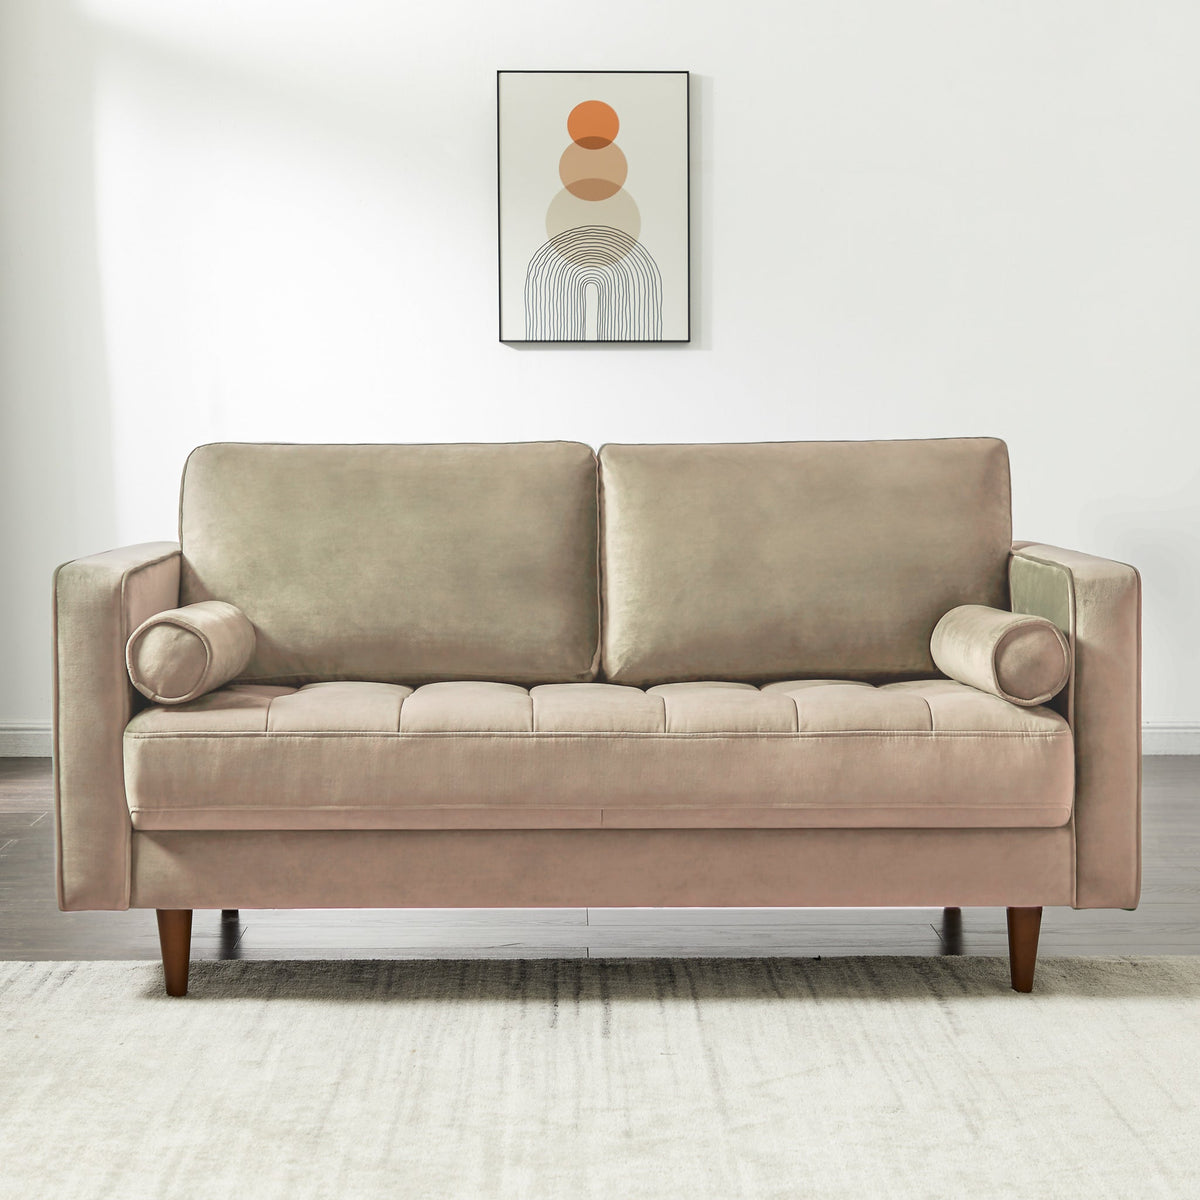 Tessa Loveseat - Taupe Couch | MidinMod | Houston TX | Best Furniture stores in Houston